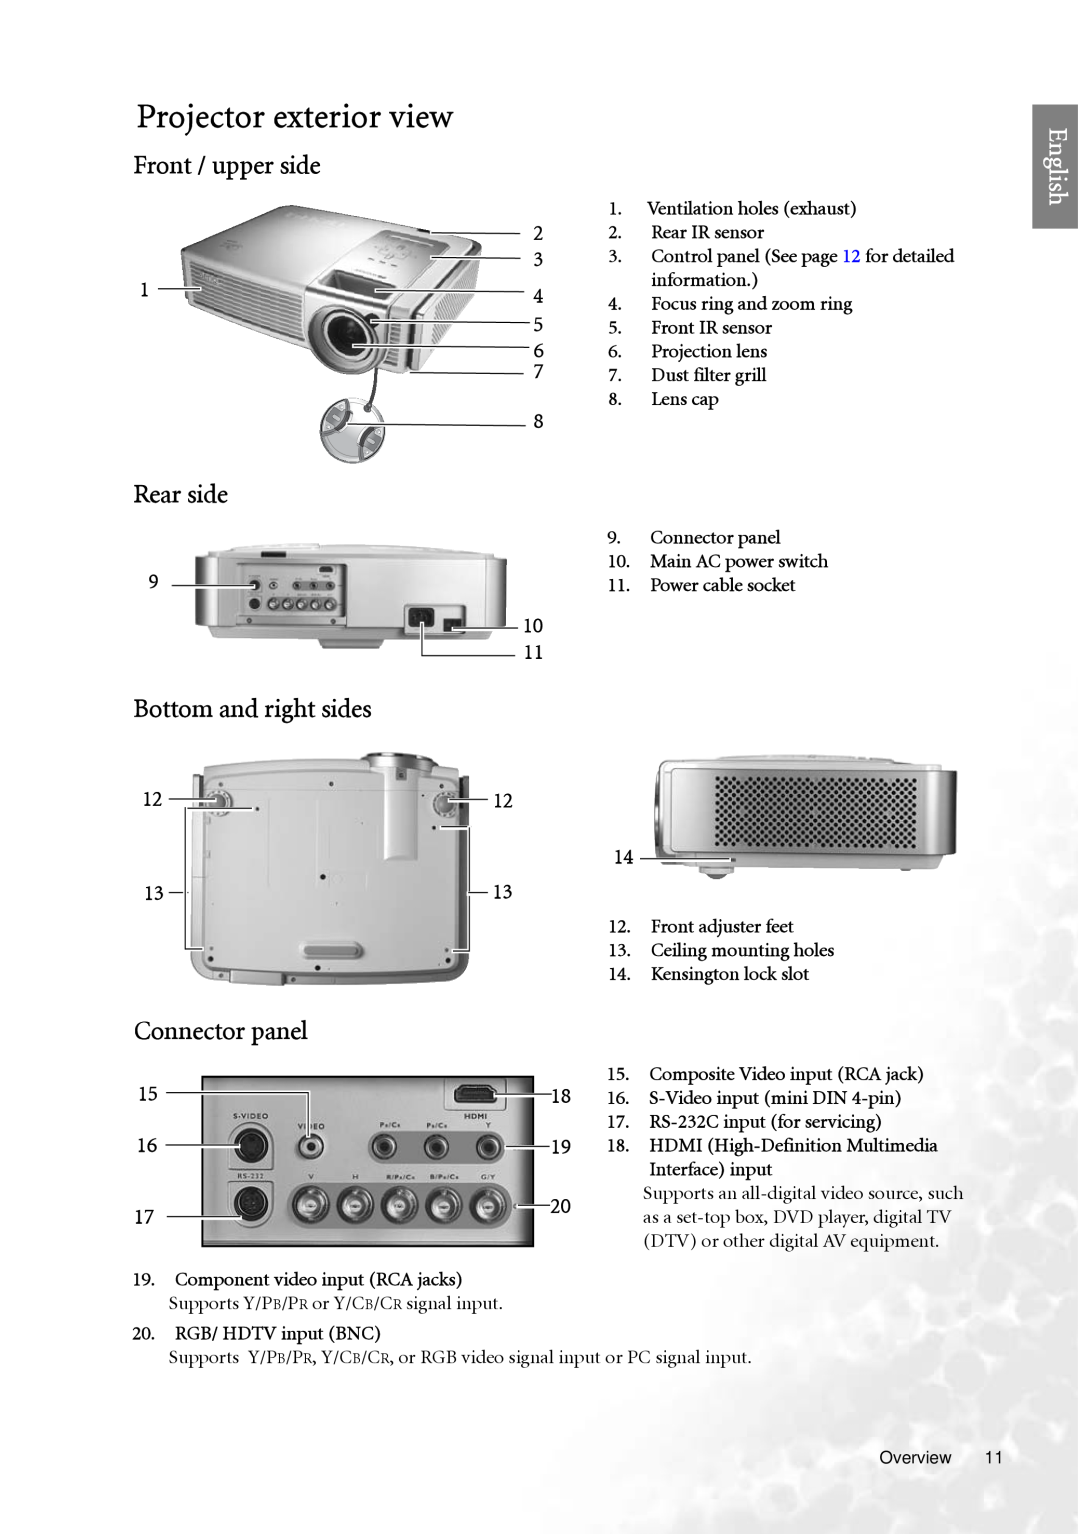 BenQ PE7700 Projector exterior view, Front / upper side, Rear side, Bottom and right sides, Connector panel, English 